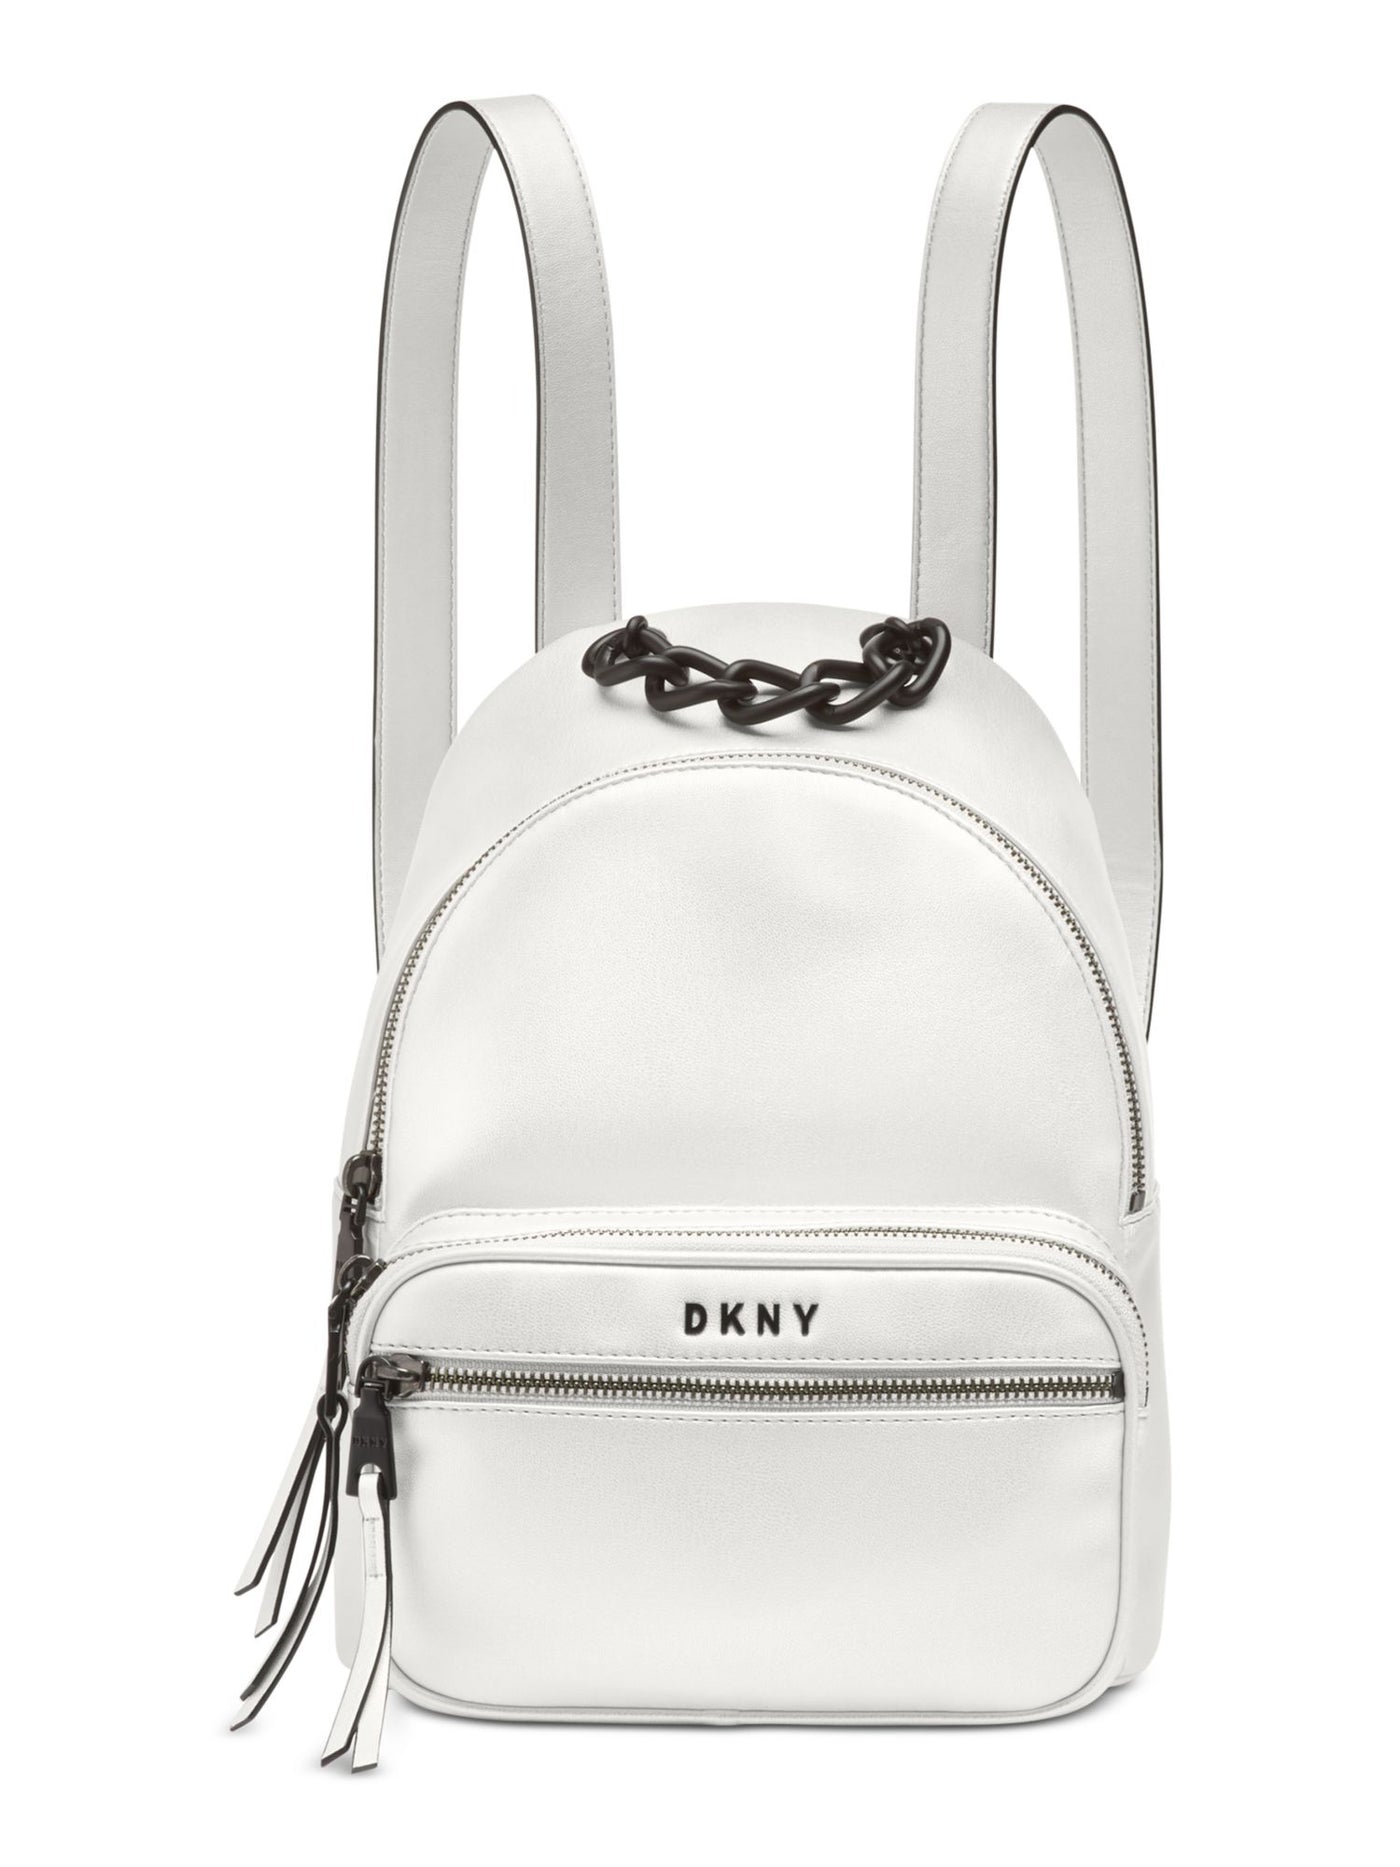 DKNY Women's White Faux Leather Adjustable Strap Backpack